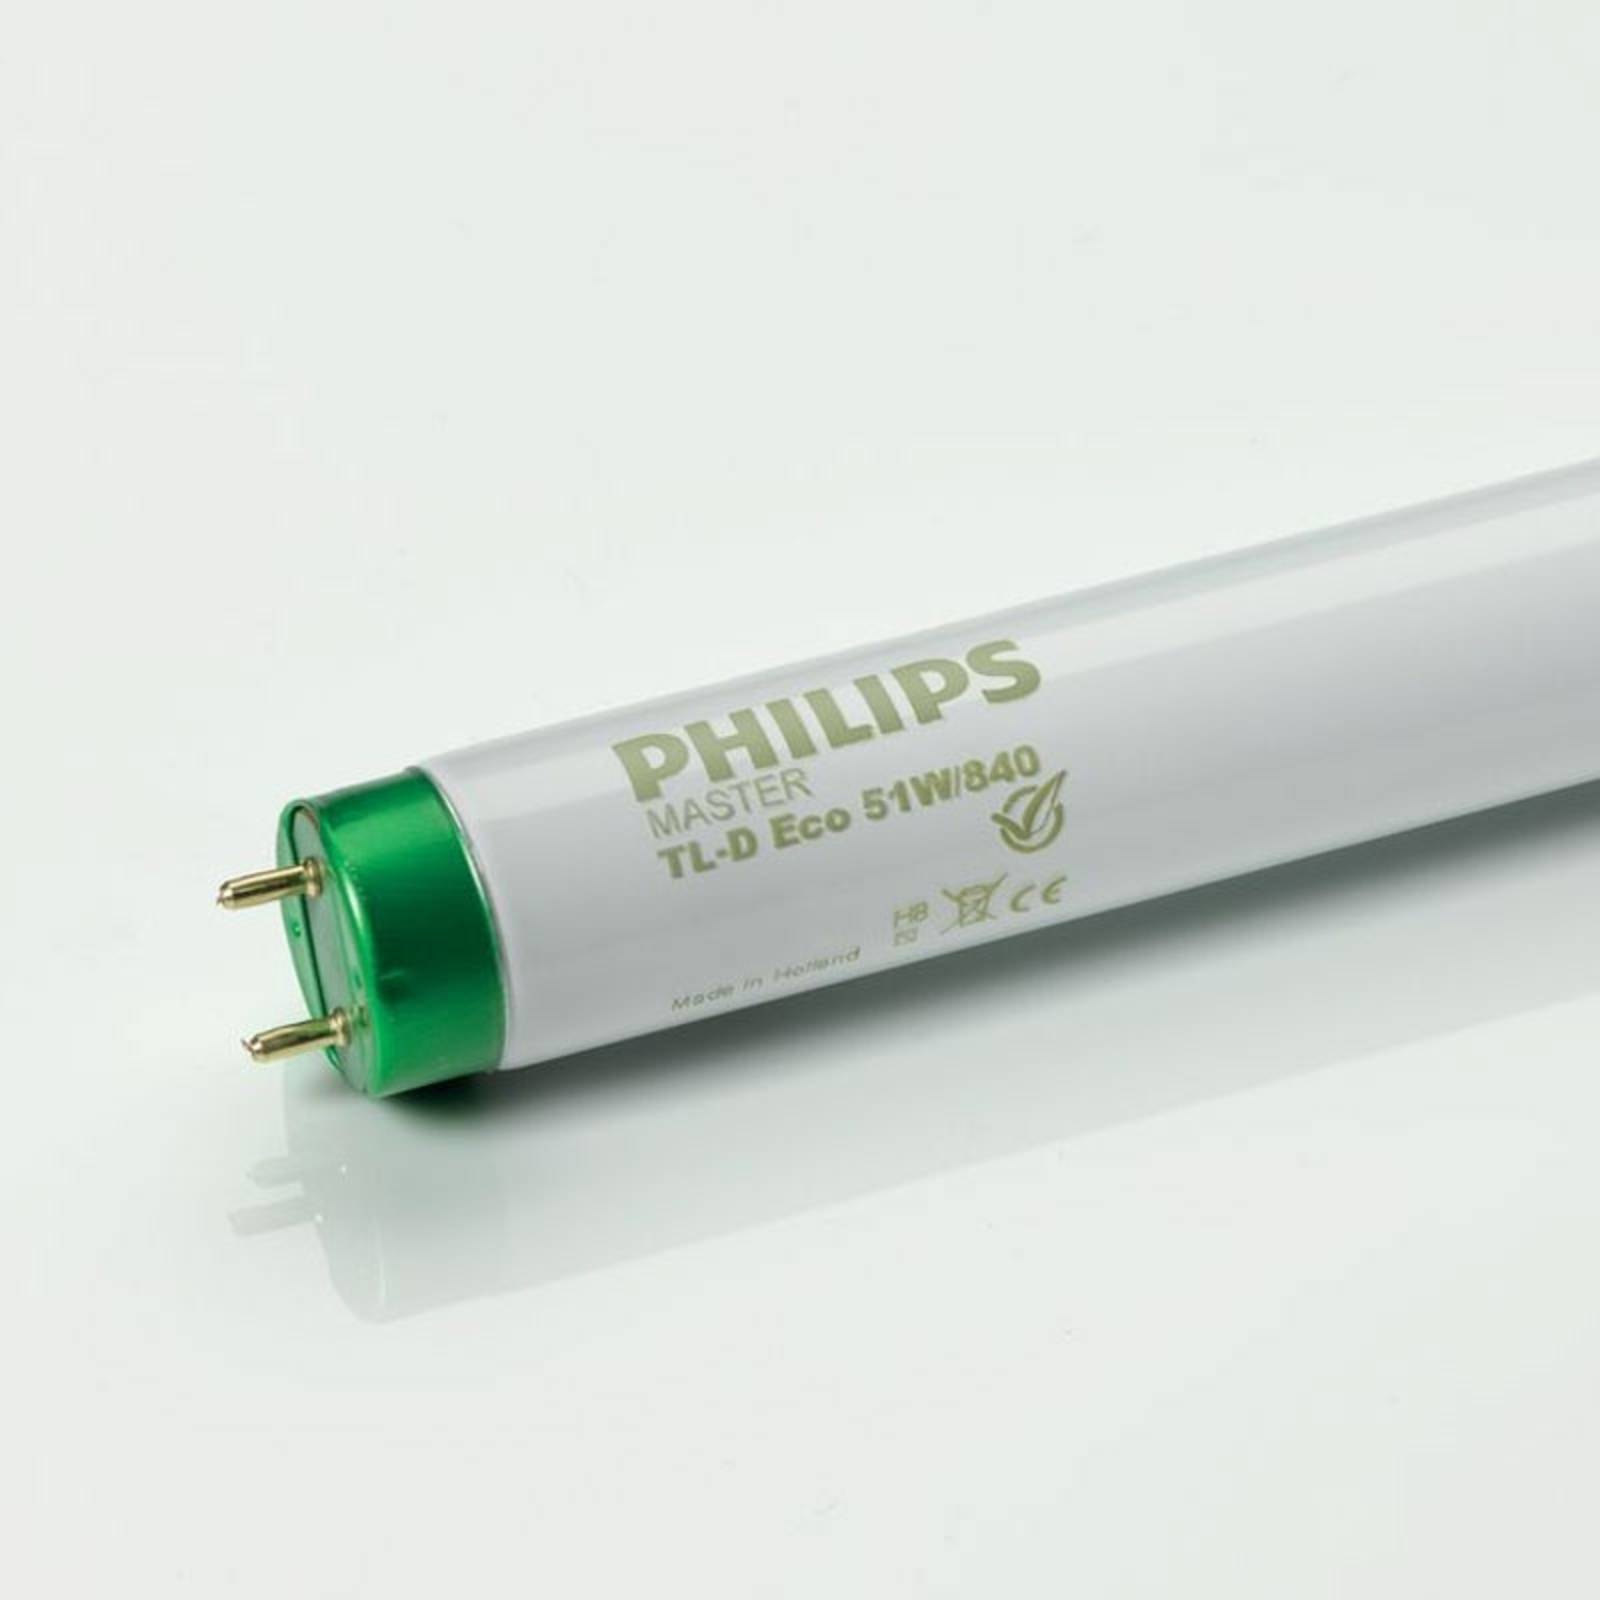 Philips Leuchtstoffröhre G13 T8 Master TL-D Eco 840 32W